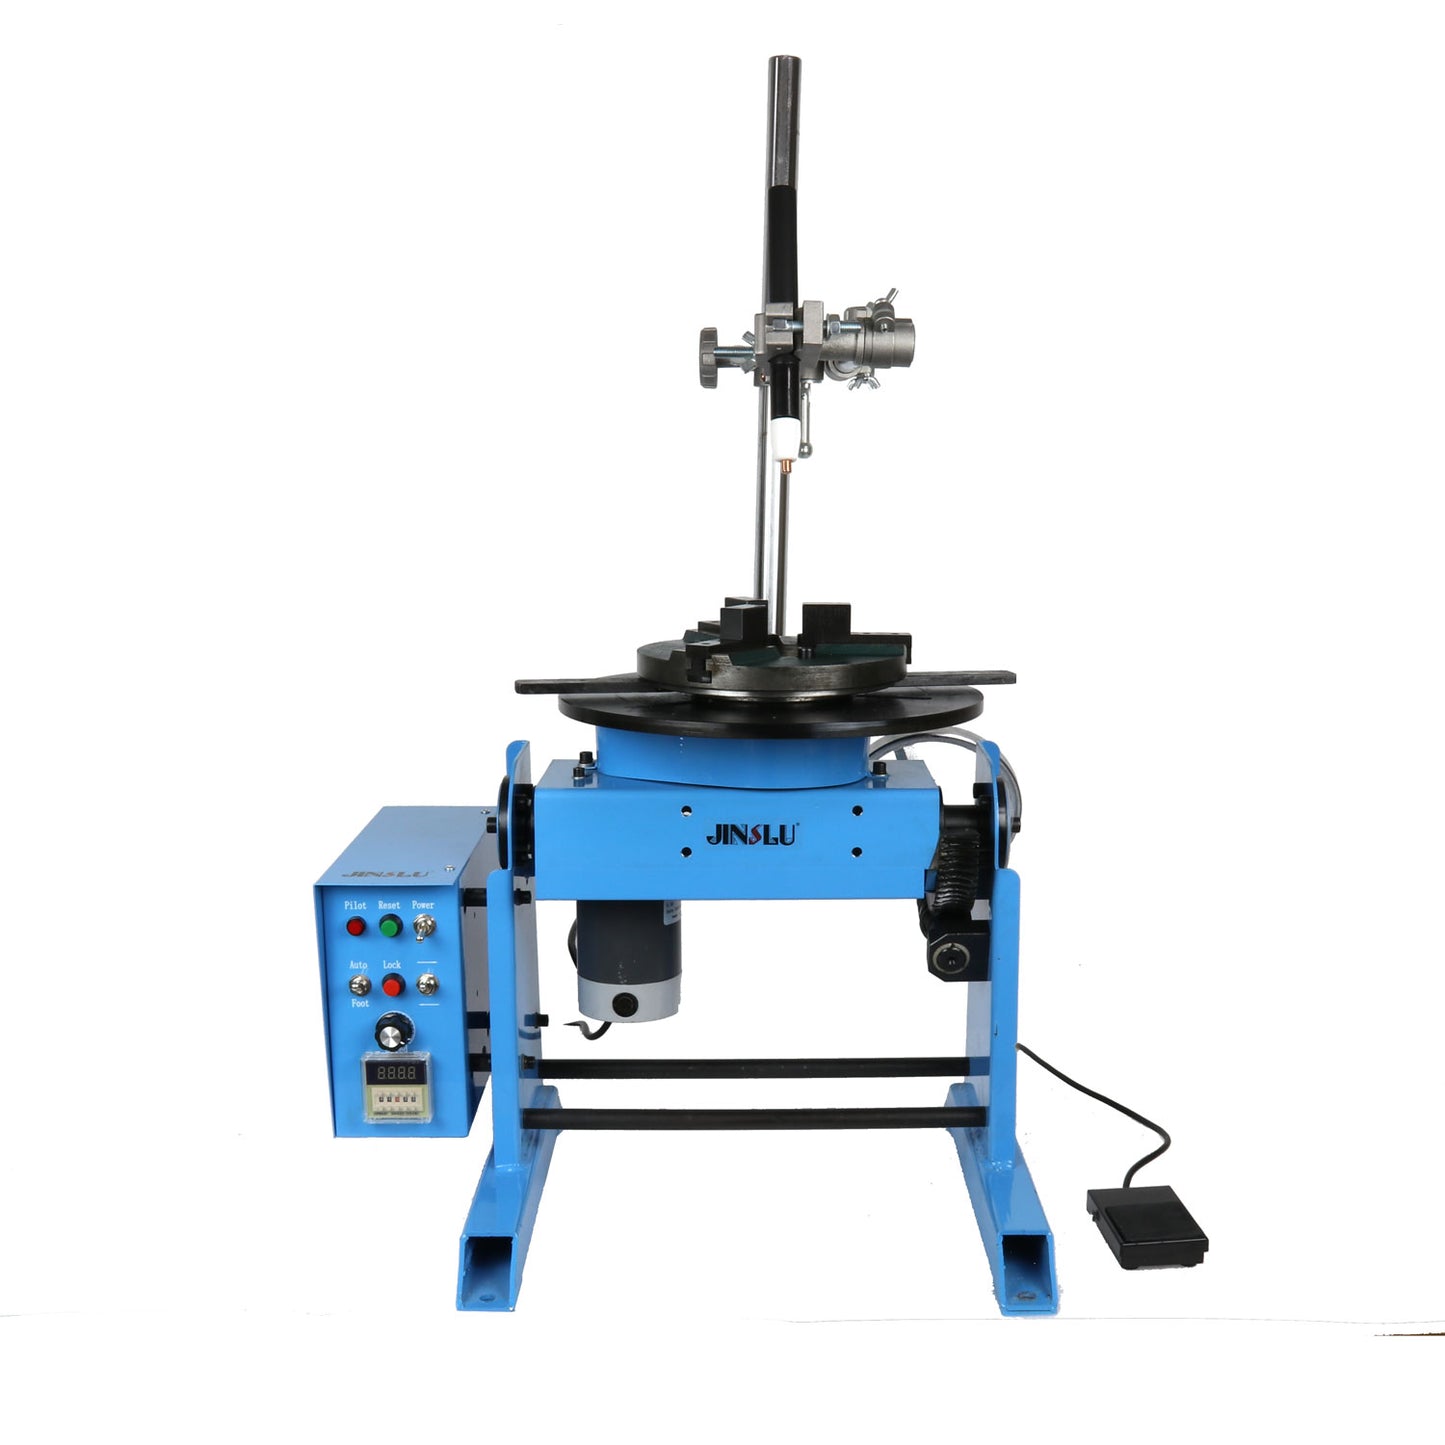 HD30 30KG Load Welding Turntable Positioner for Pipe Welding with 200mm Manual Chuck. (Customized products, please contact us to buy, EMAIL: sales@jinslu.com)